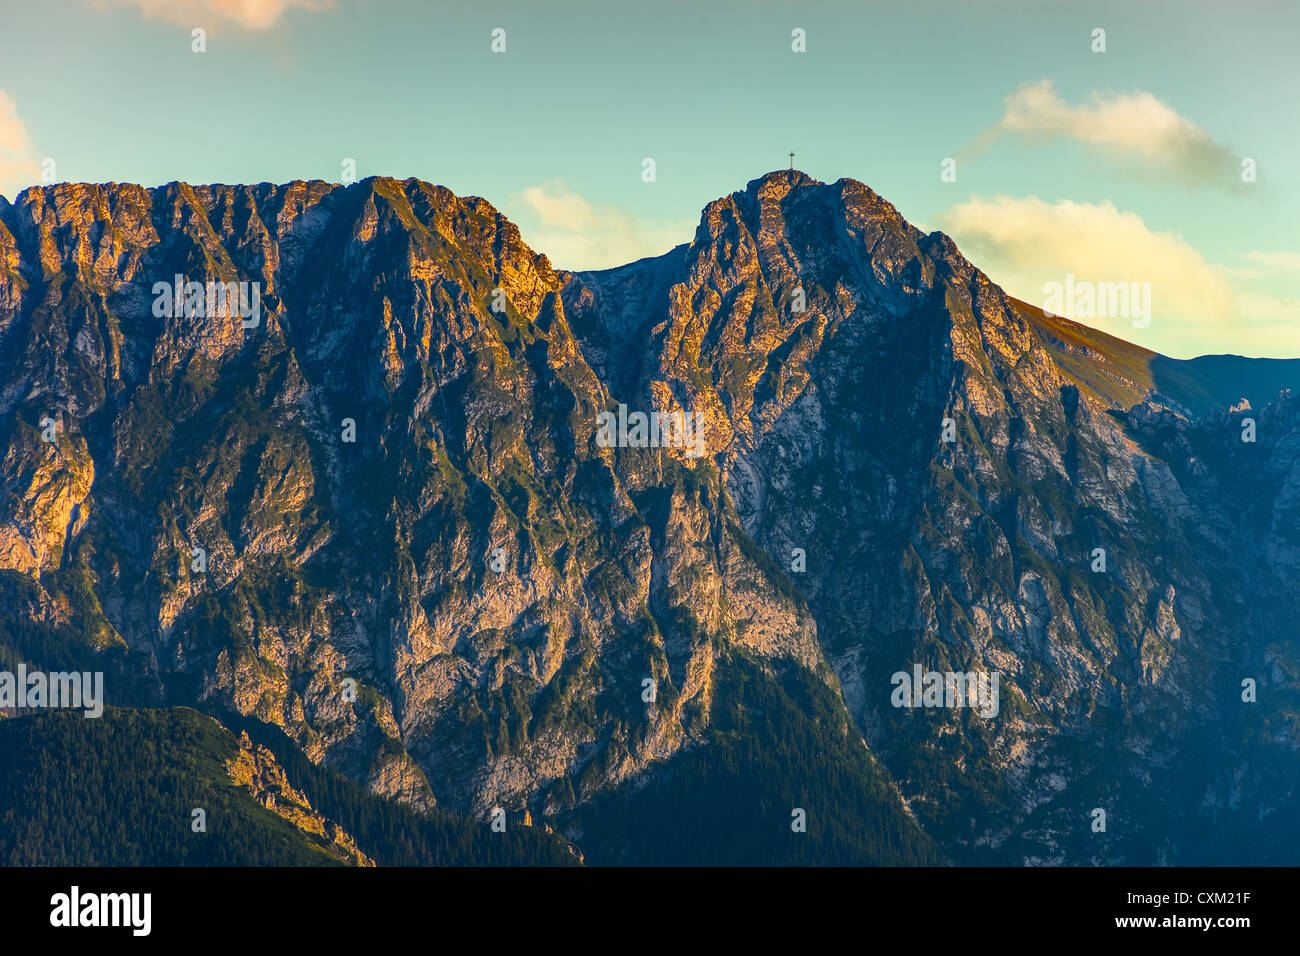 Giewont - Famous mountain in Polish Tatras with a cross on top. Stock Photo